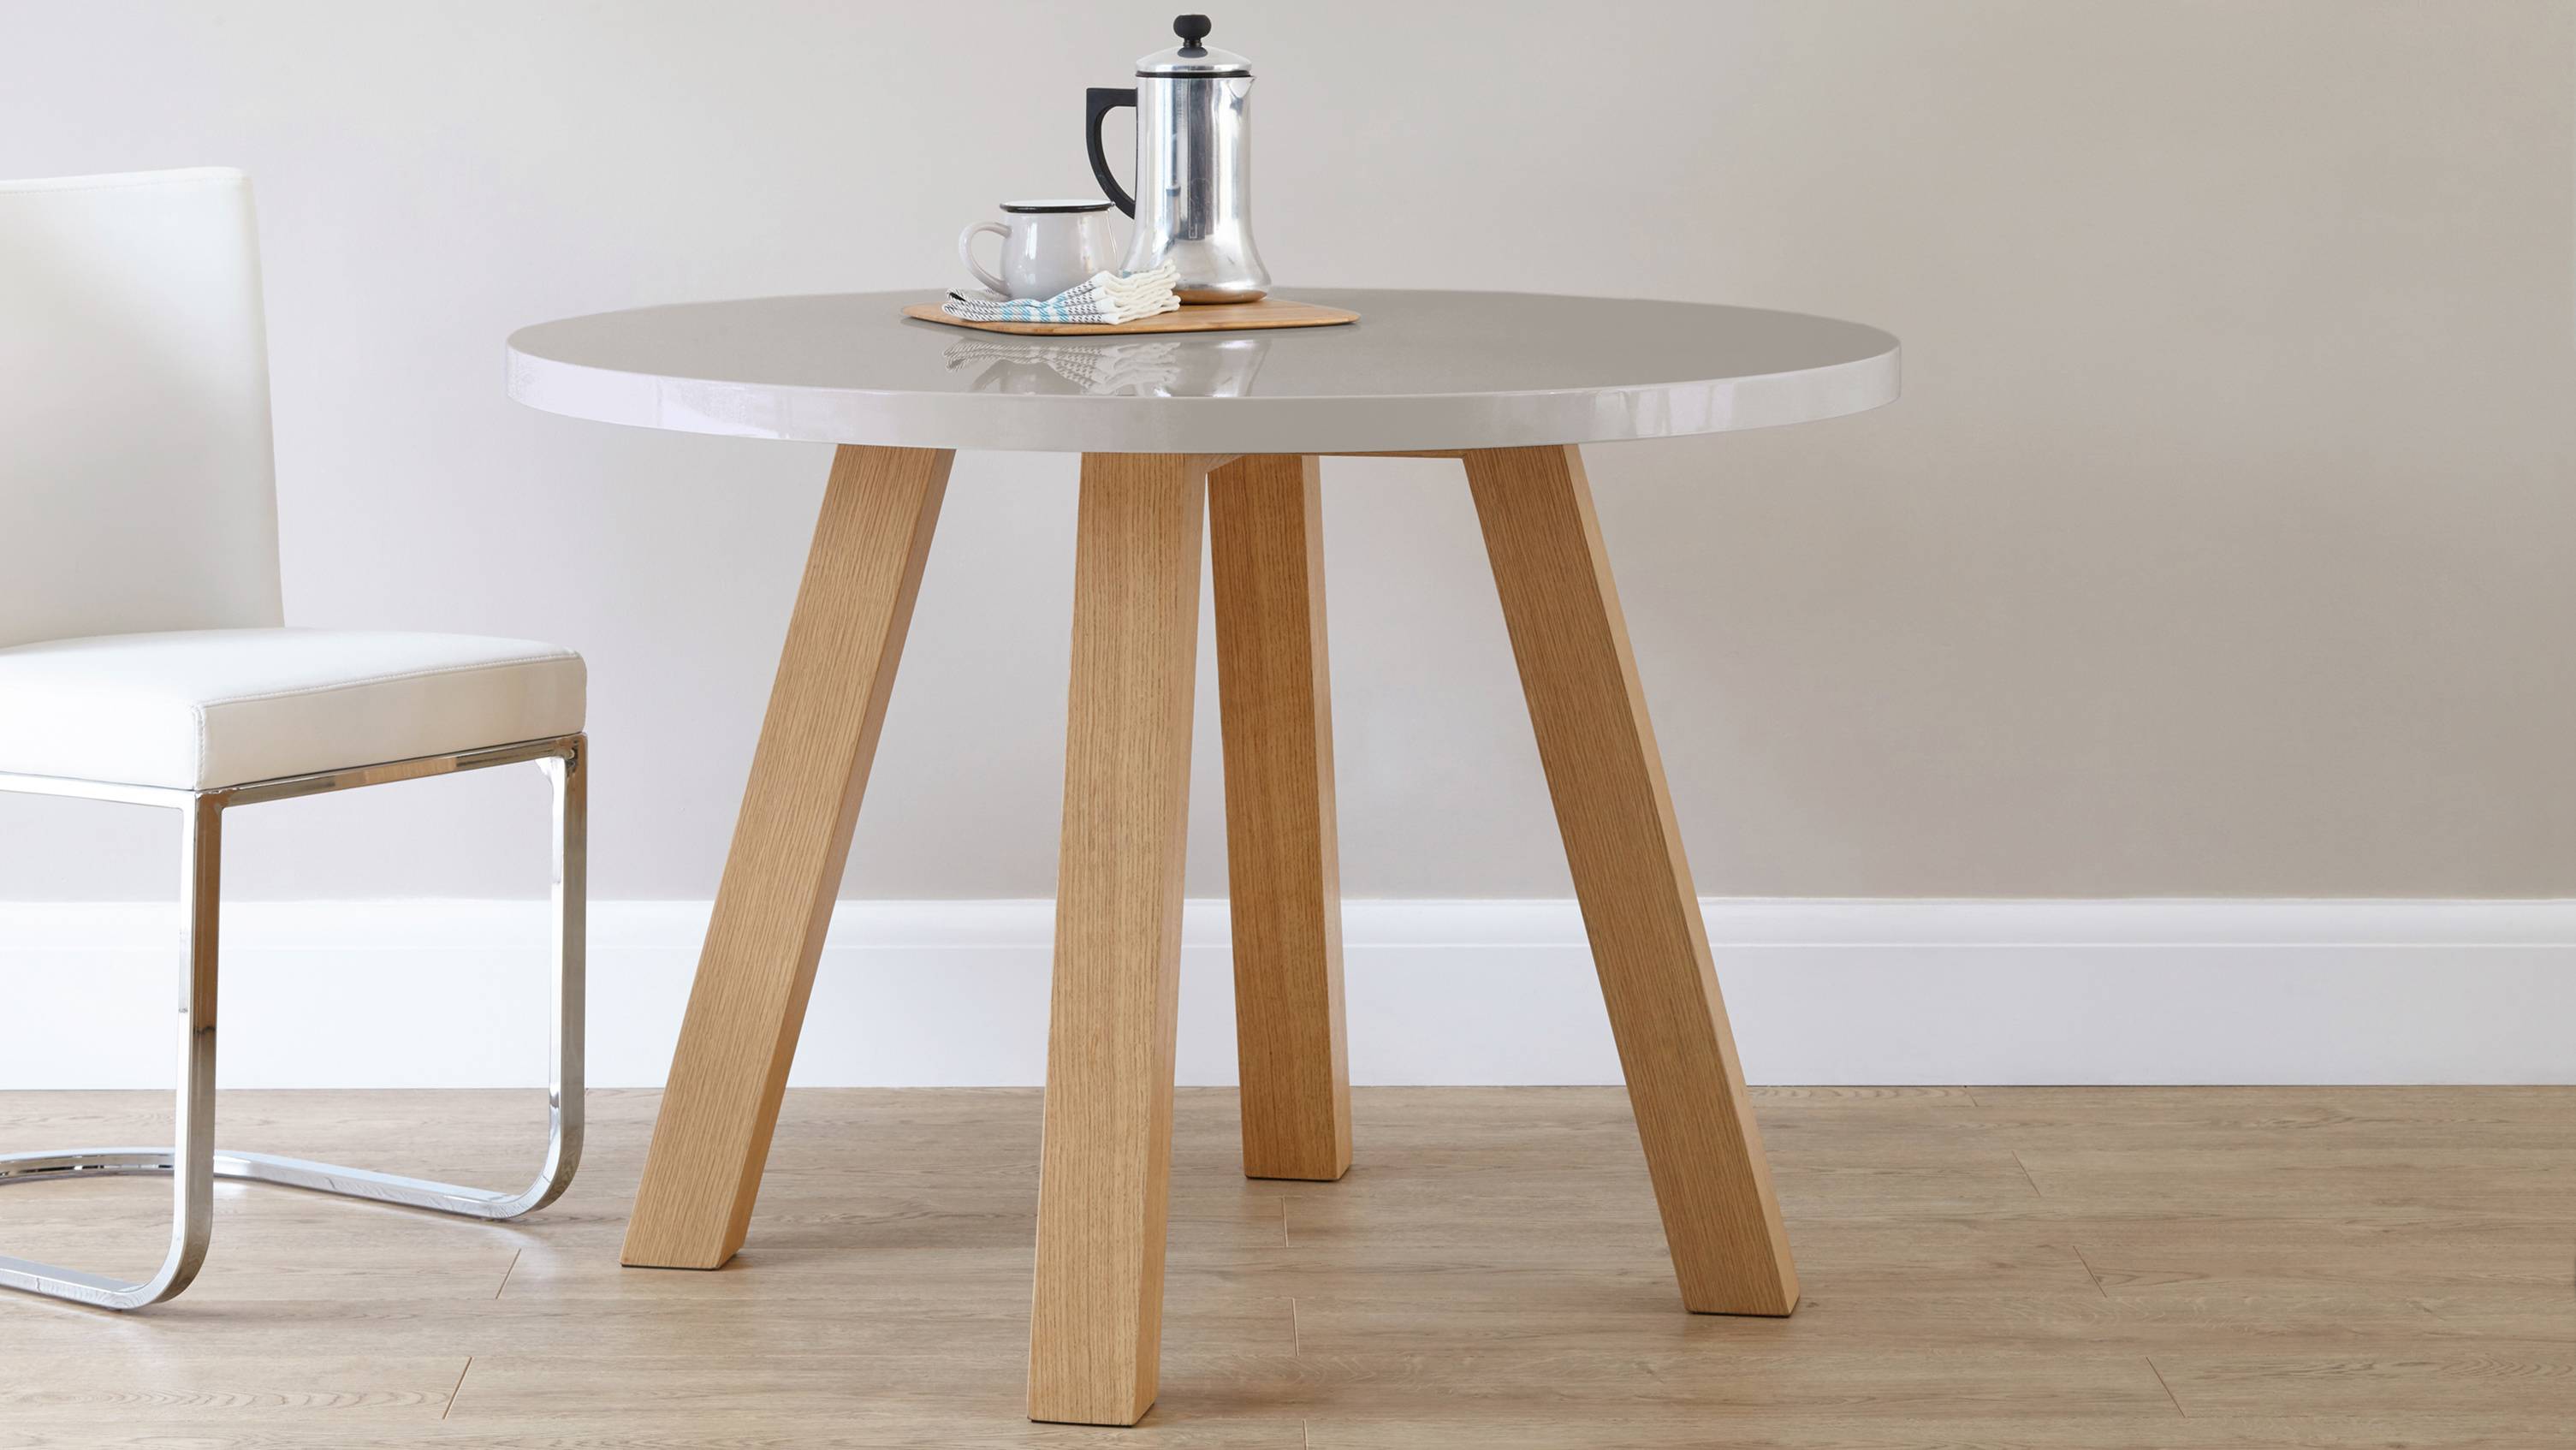 4 Seater Oak Dining Table Exclusively Danetti with Julia Kendell Range